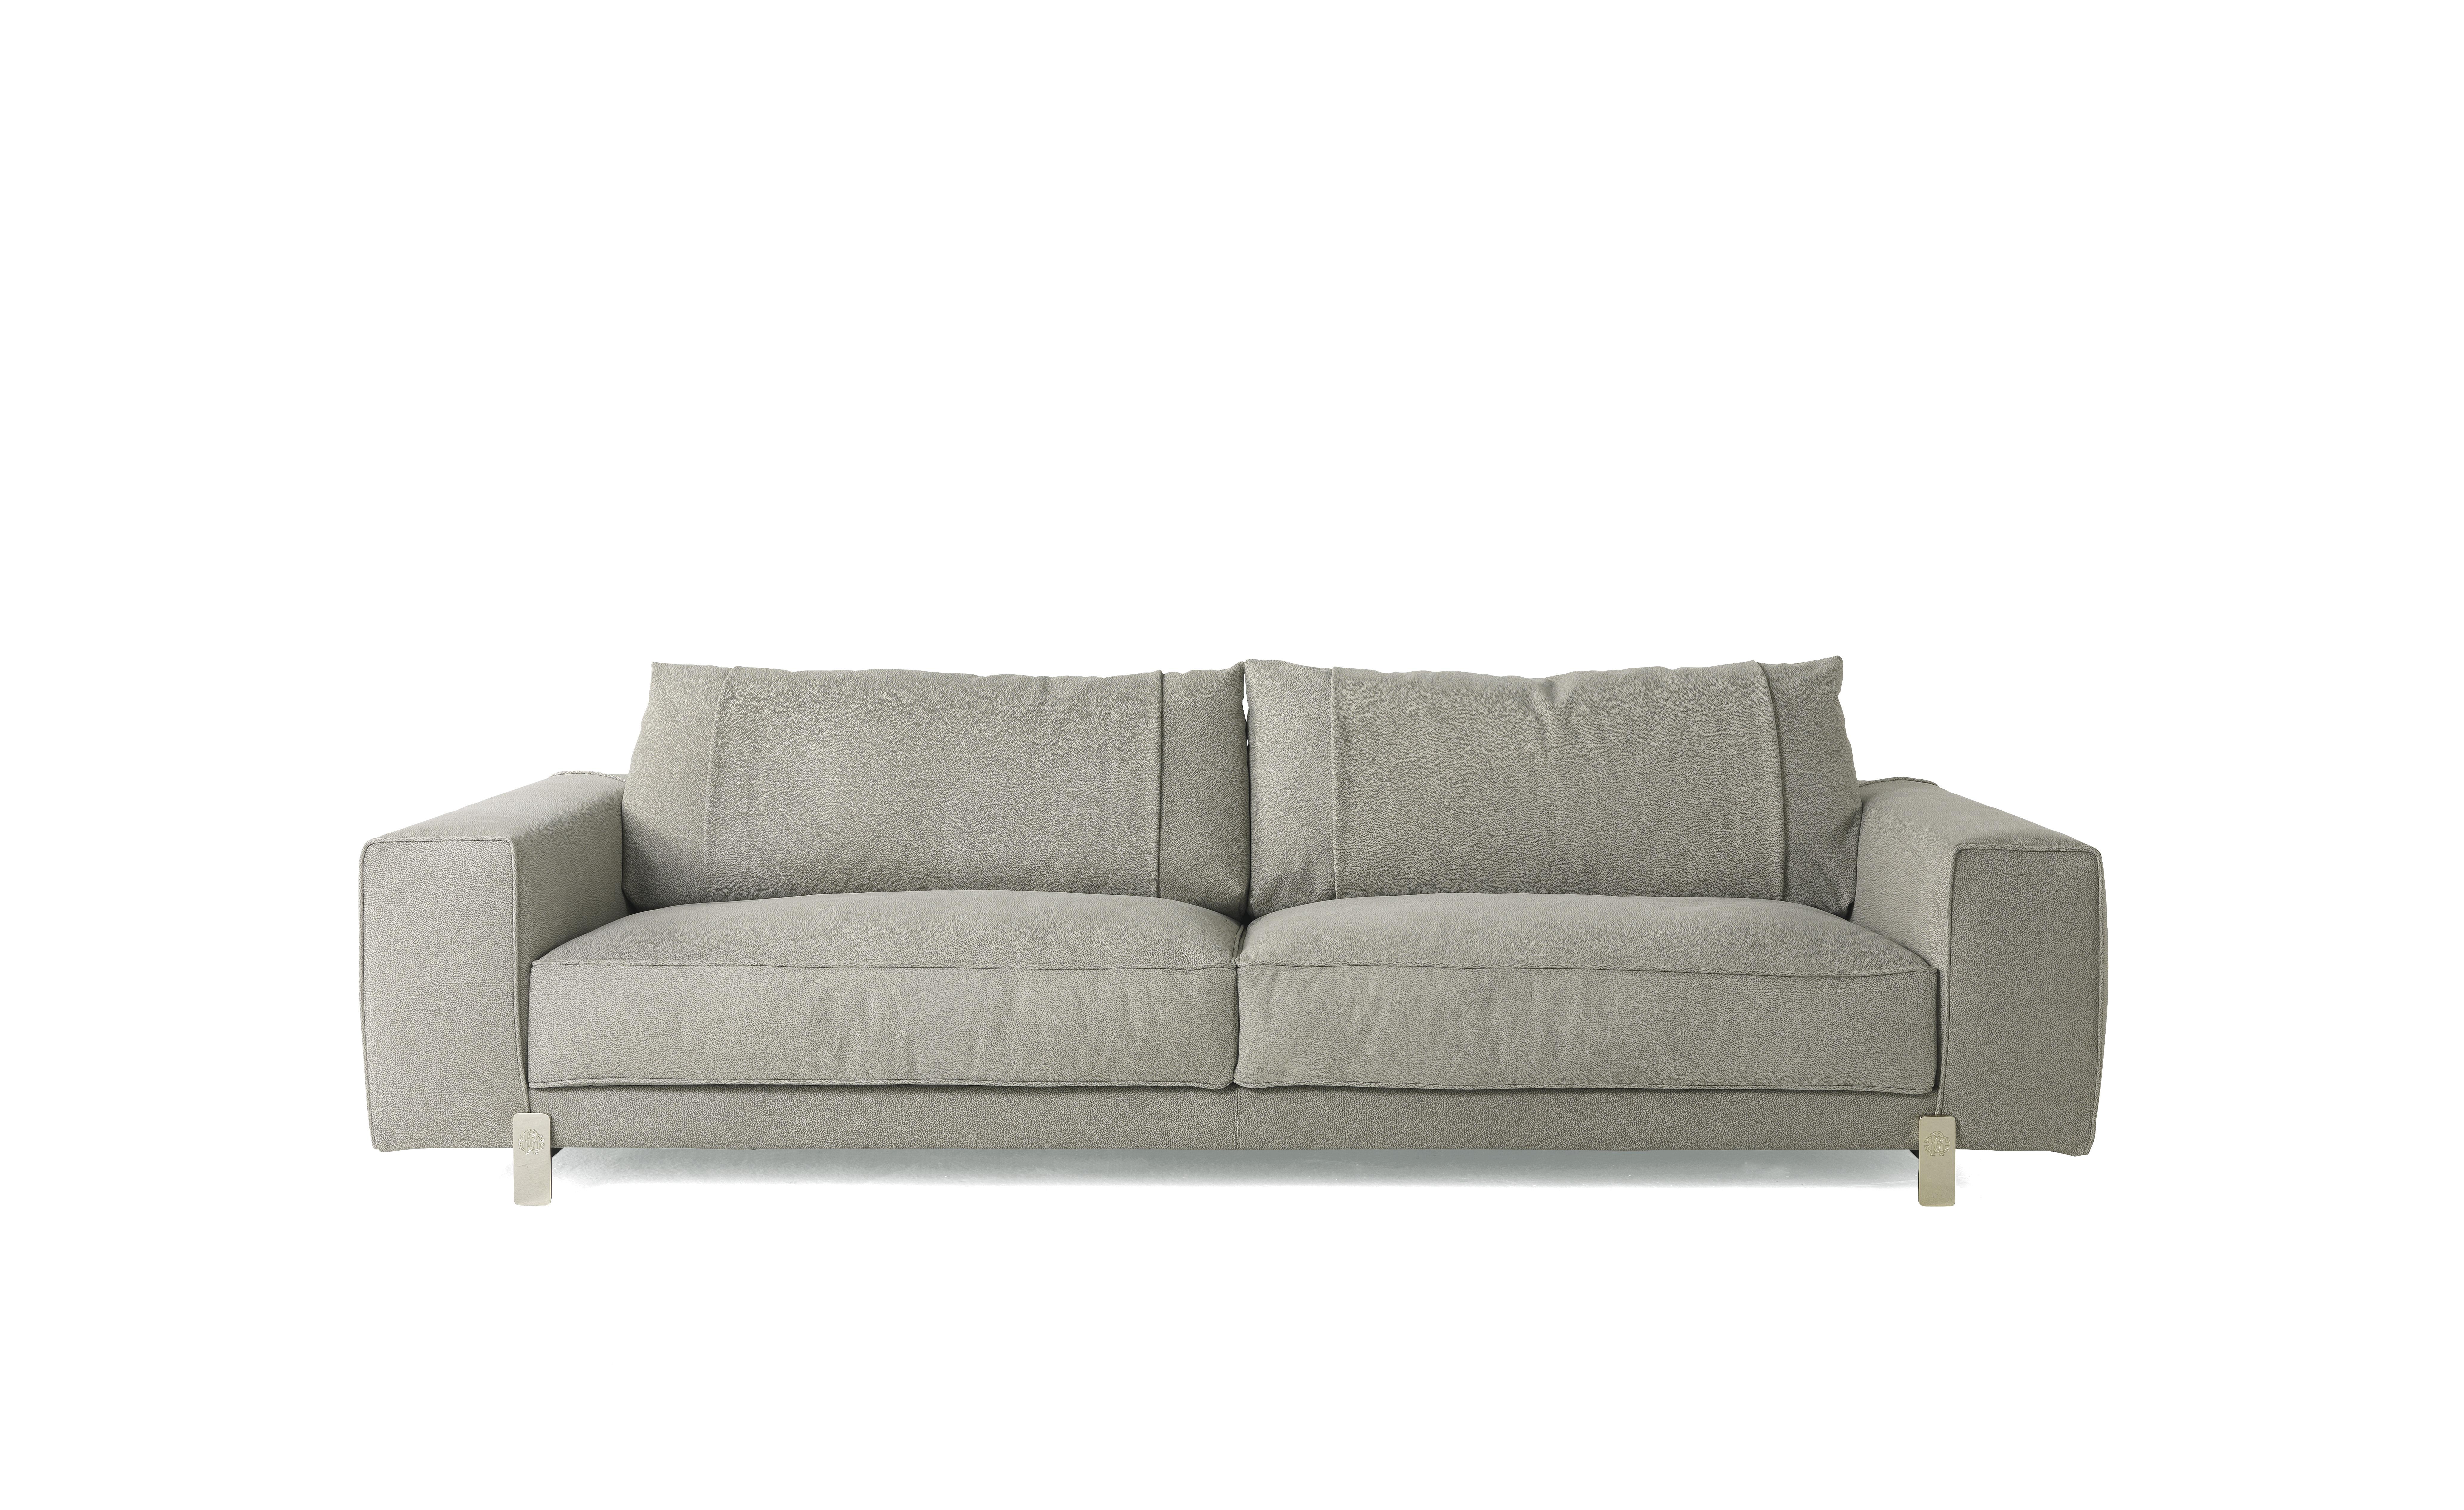 Italian 21st Century Caicos 3-Seater Sofa in Leather by Roberto Cavalli Home Interiors  For Sale